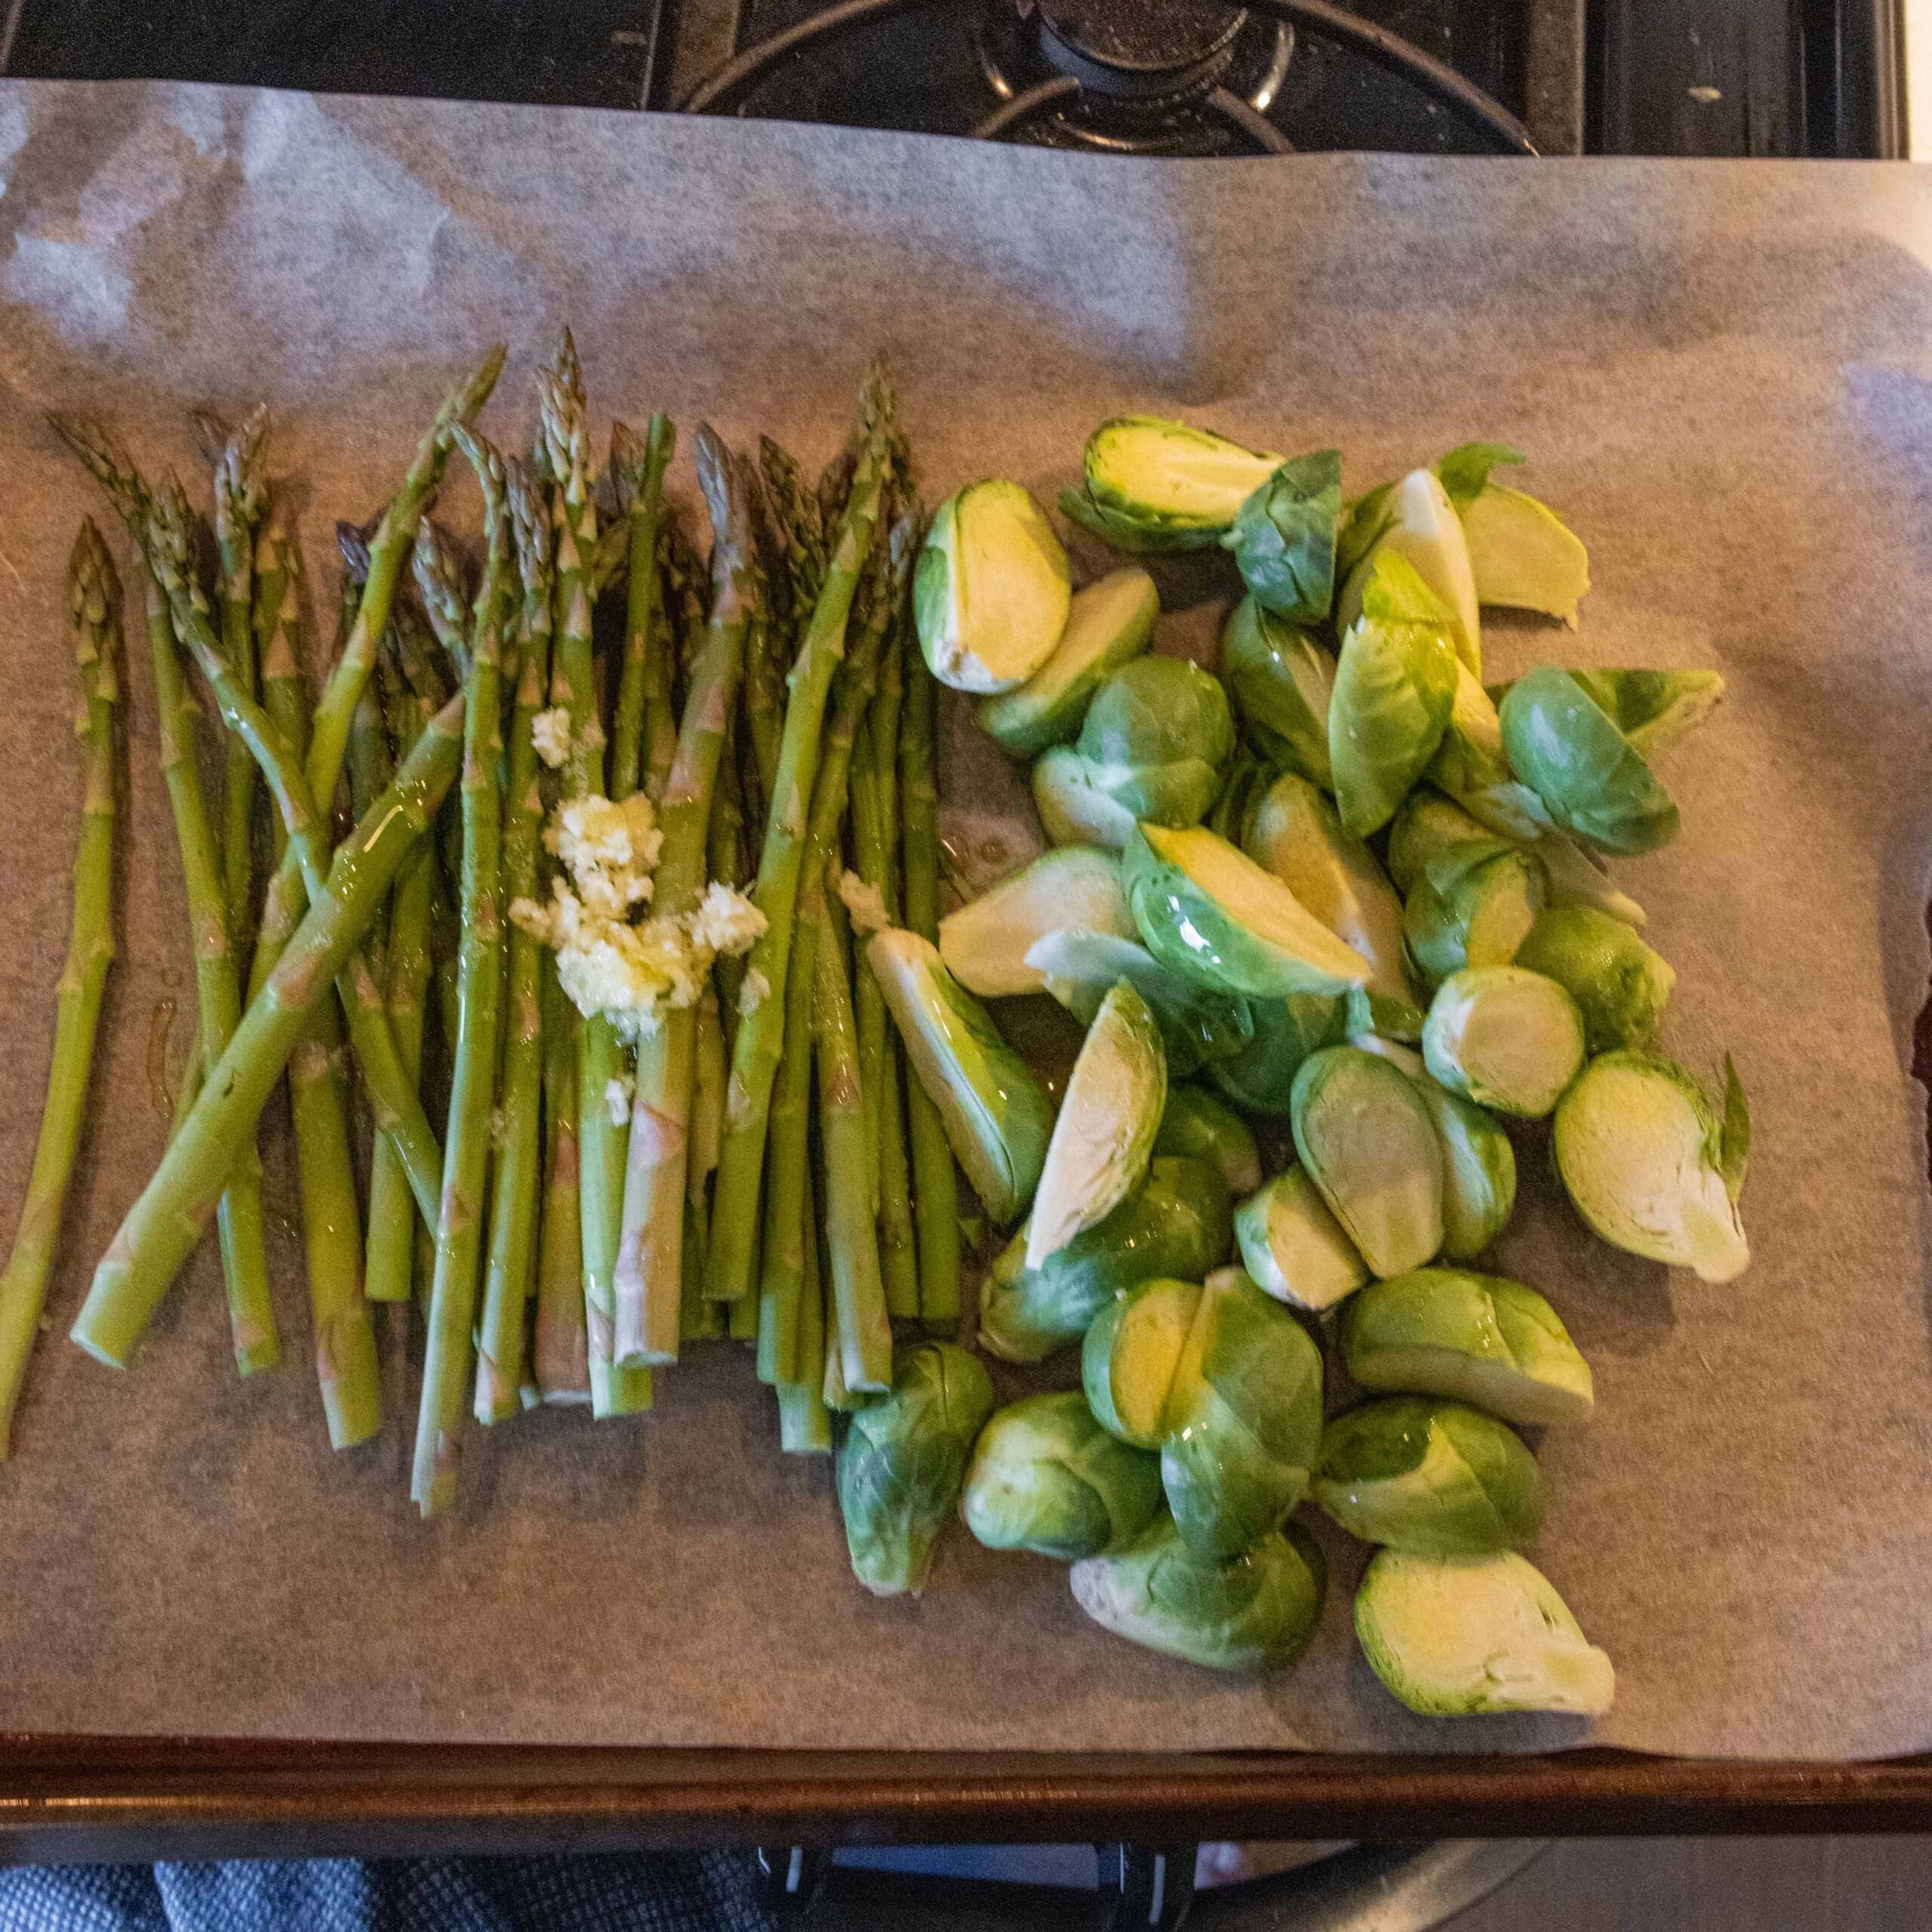 asparagus and brussels sprouts with garlic and olive oil